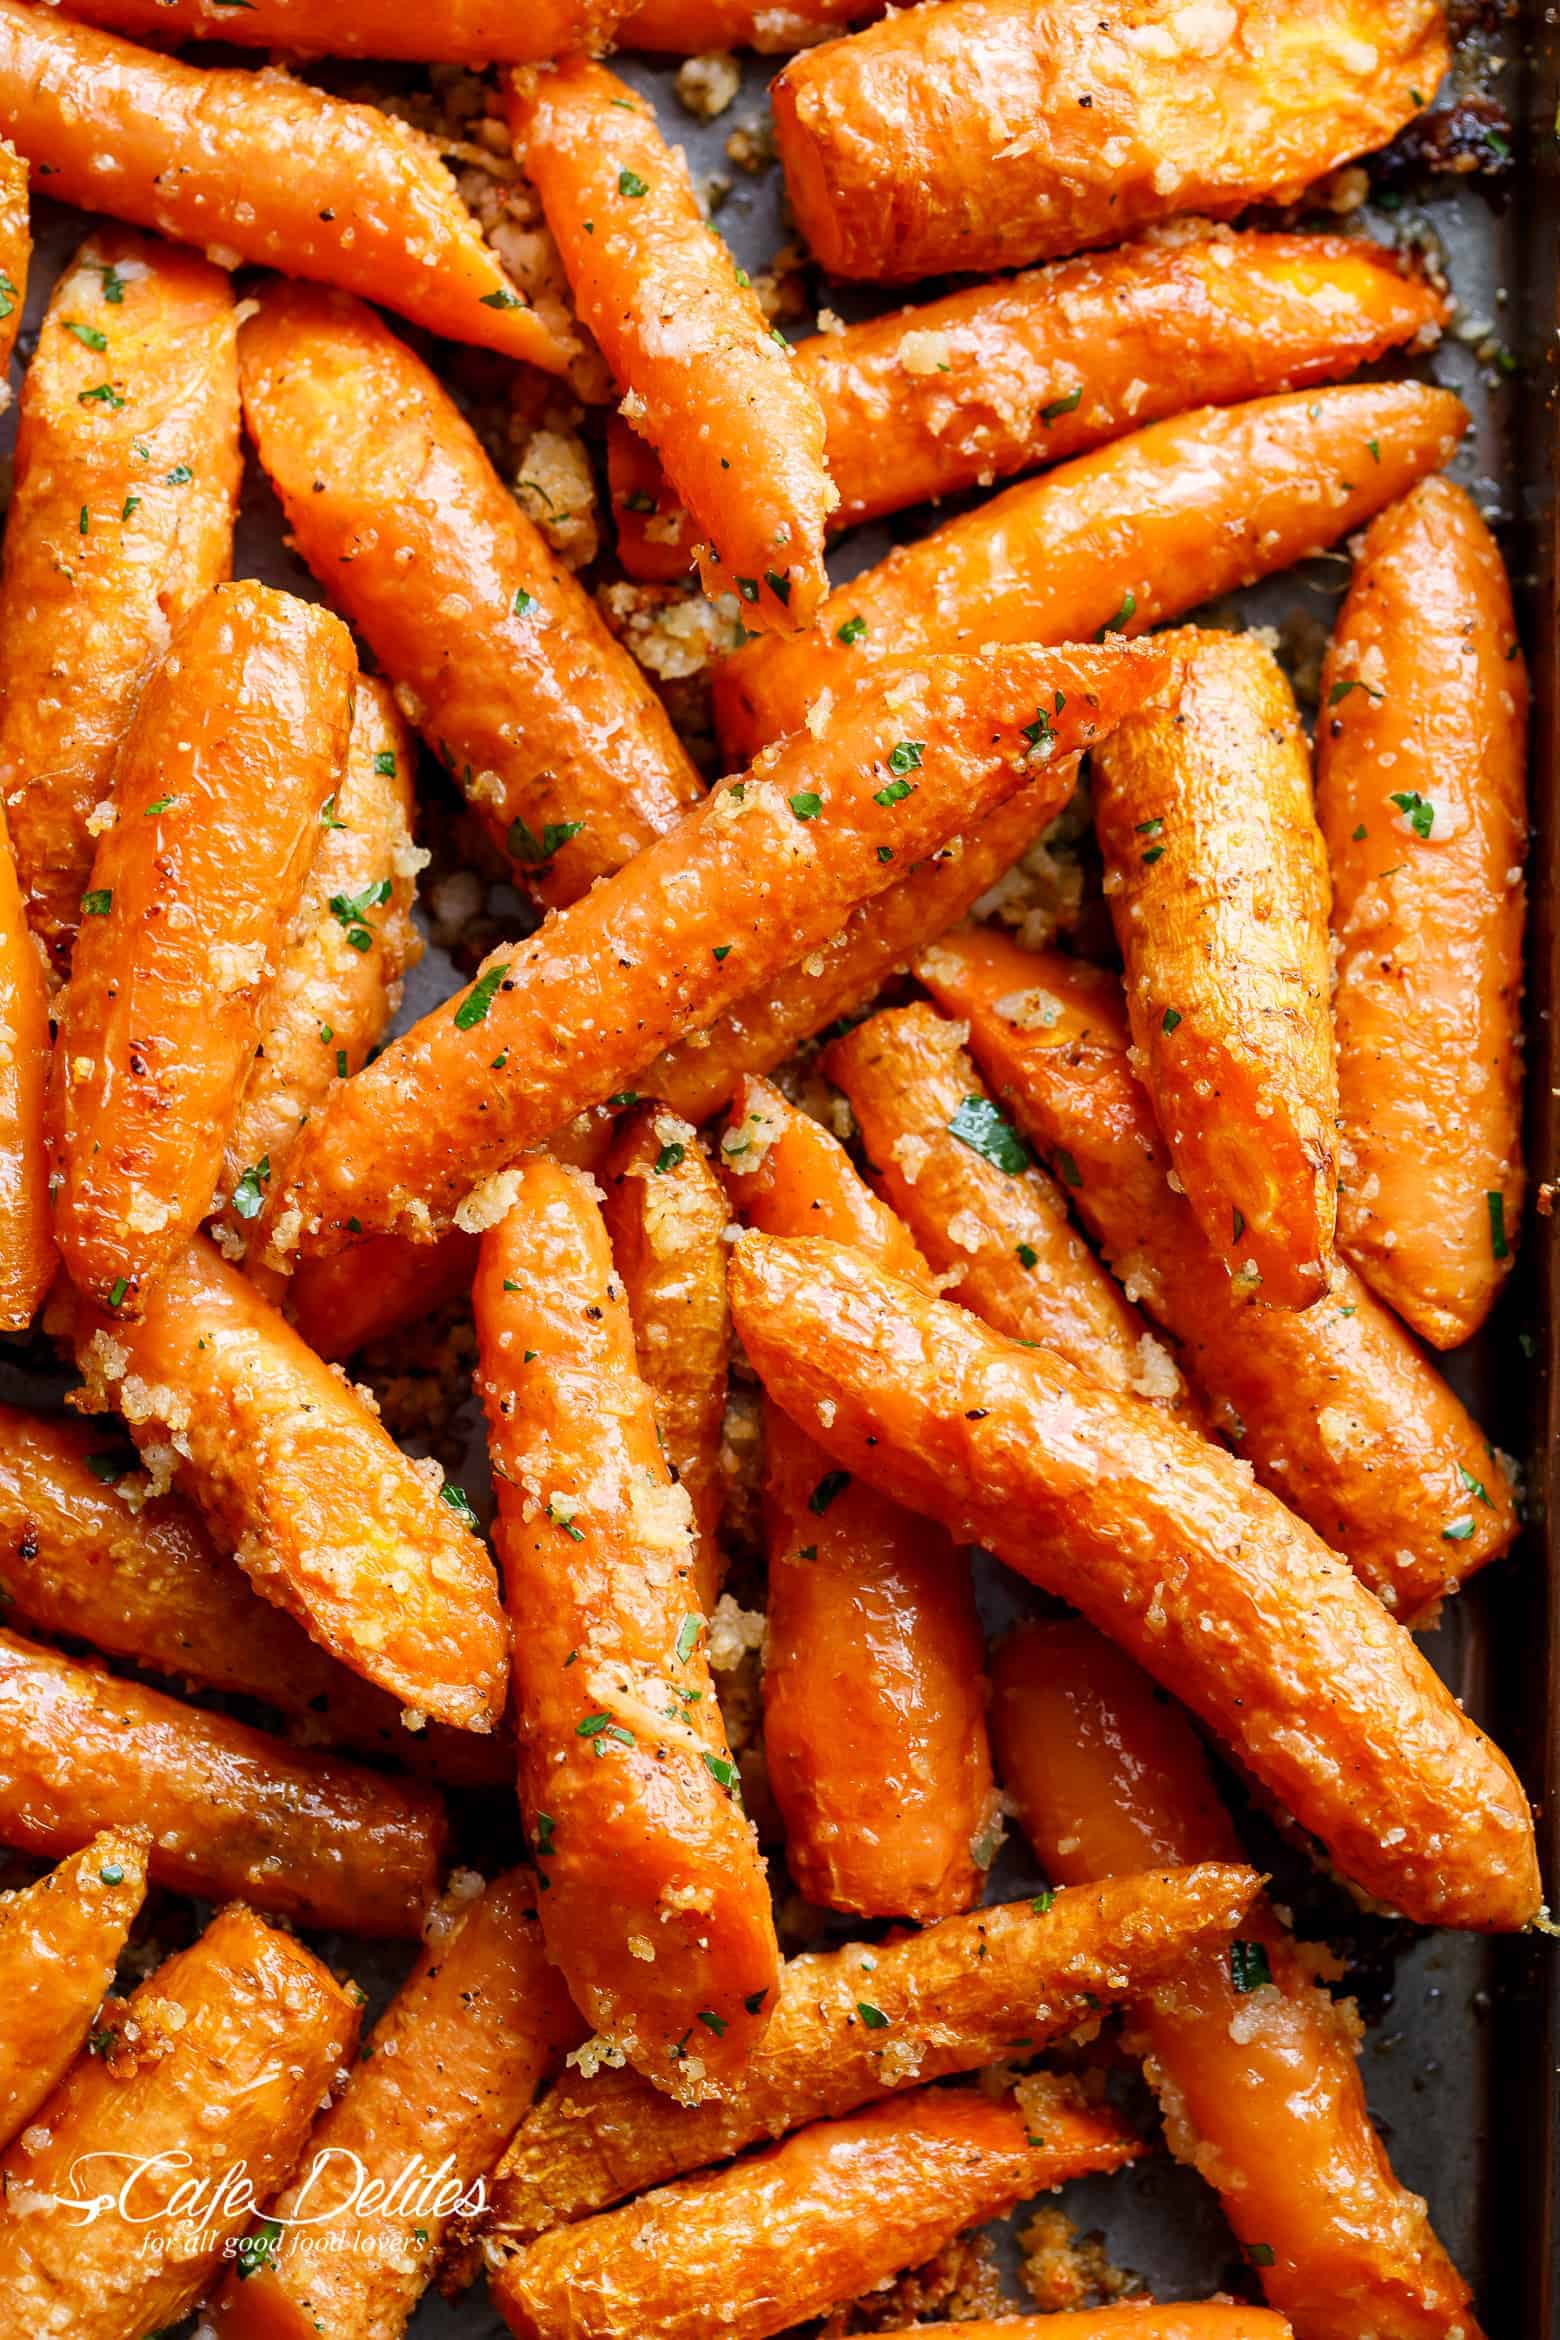 Garlic Parmesan Roasted Carrots are so unbelievably easy to throw together with olive oil, garlic, parmesan cheese and breadcrumbs! | cafedelites.com